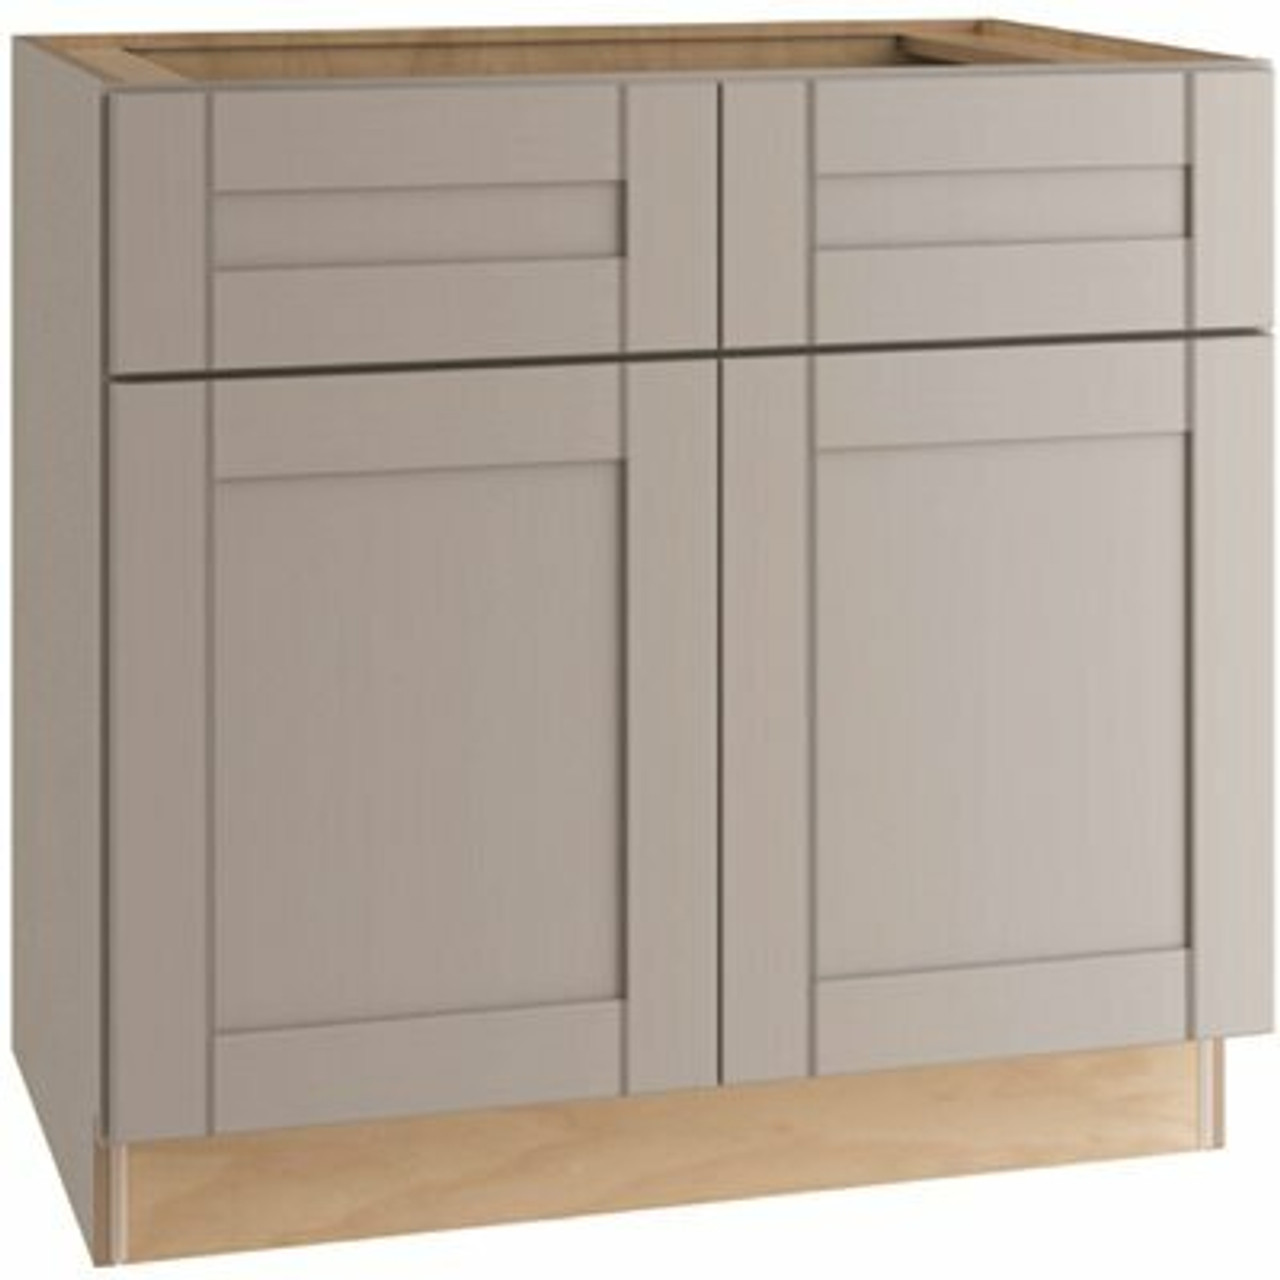 Arlington Veiled Gray Shaker Assembled Plywood 33 In. X 34.5 In. X 24 In. Base Kitchen Cabinet With Soft Close